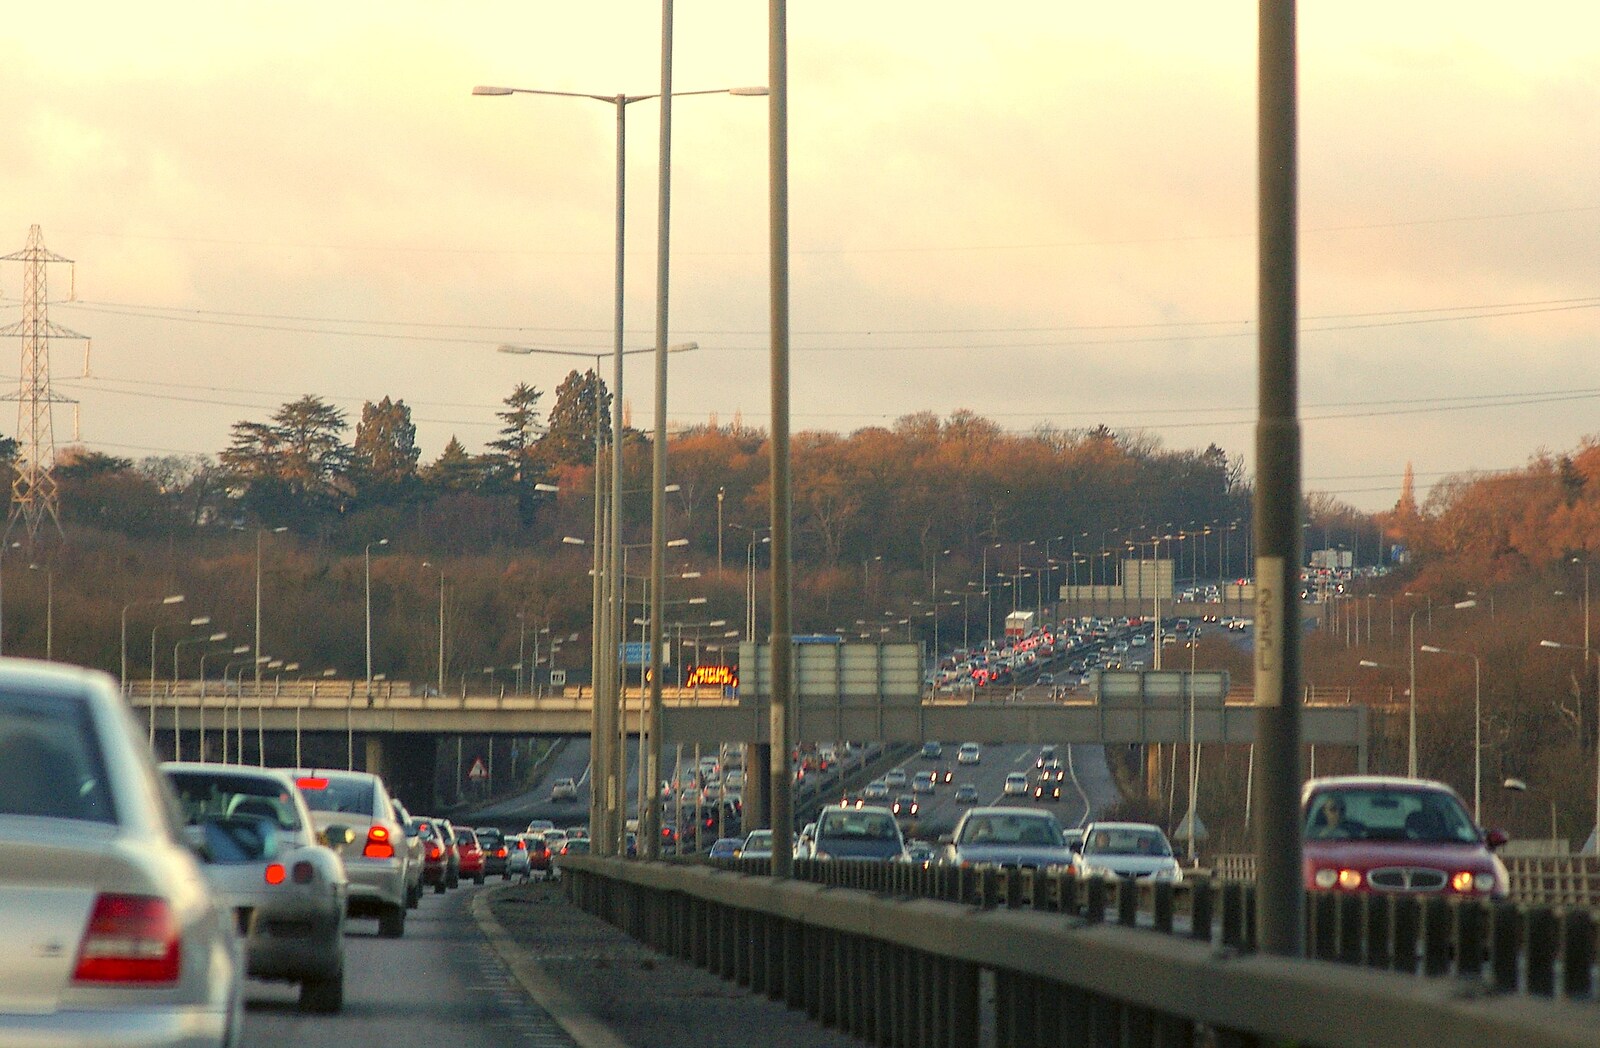 The M25 at Junction 16 from Boxing Day Miscellany, Hordle and Barton-on-Sea, Hampshire - 26th December 2005